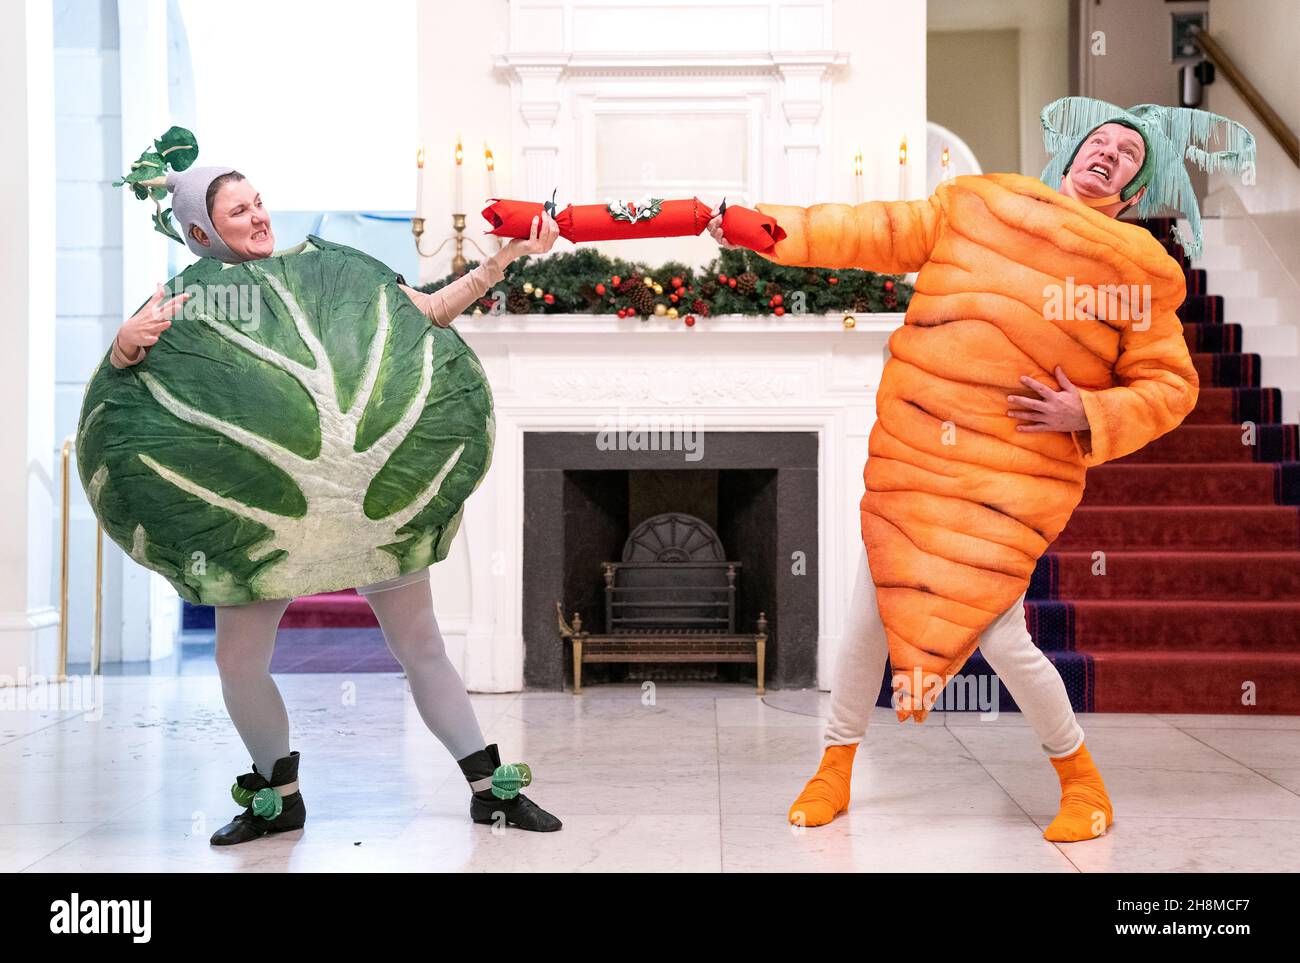 Cast members (from left) Sita Pieraccini and Richard Conlon get into character ahead of their show 'Christmas Dinner' at the Lyceum Theatre, Edinburgh, which will run from 6 December 2021 - 2 January 2022. Picture date: Tuesday November 30, 2021. Stock Photo